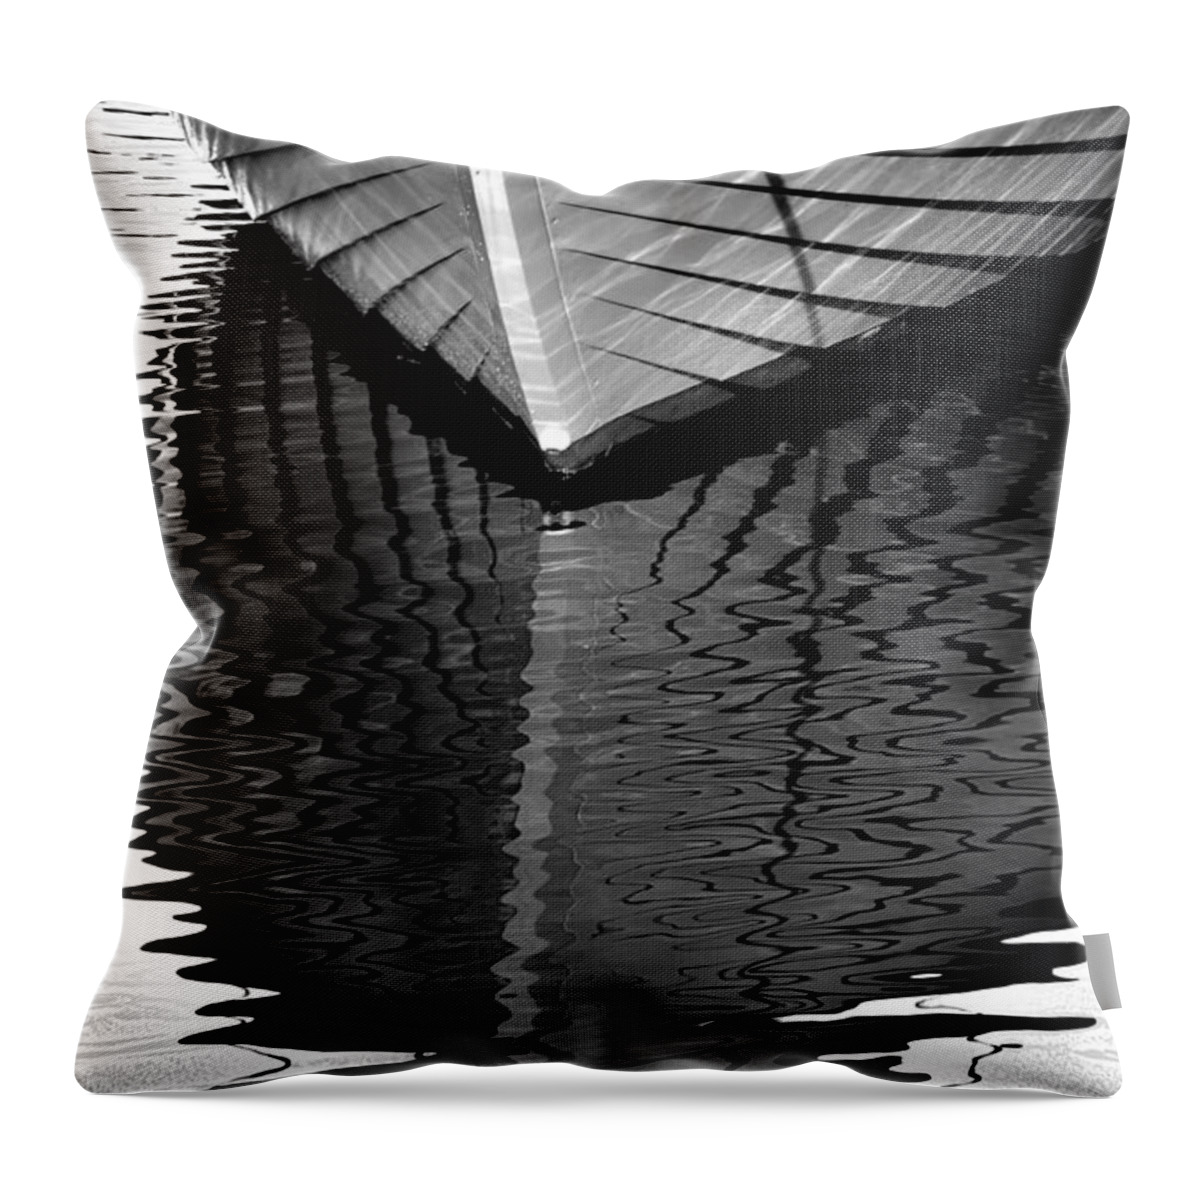 Abstract Throw Pillow featuring the photograph Dream Weave by Lauren Leigh Hunter Fine Art Photography